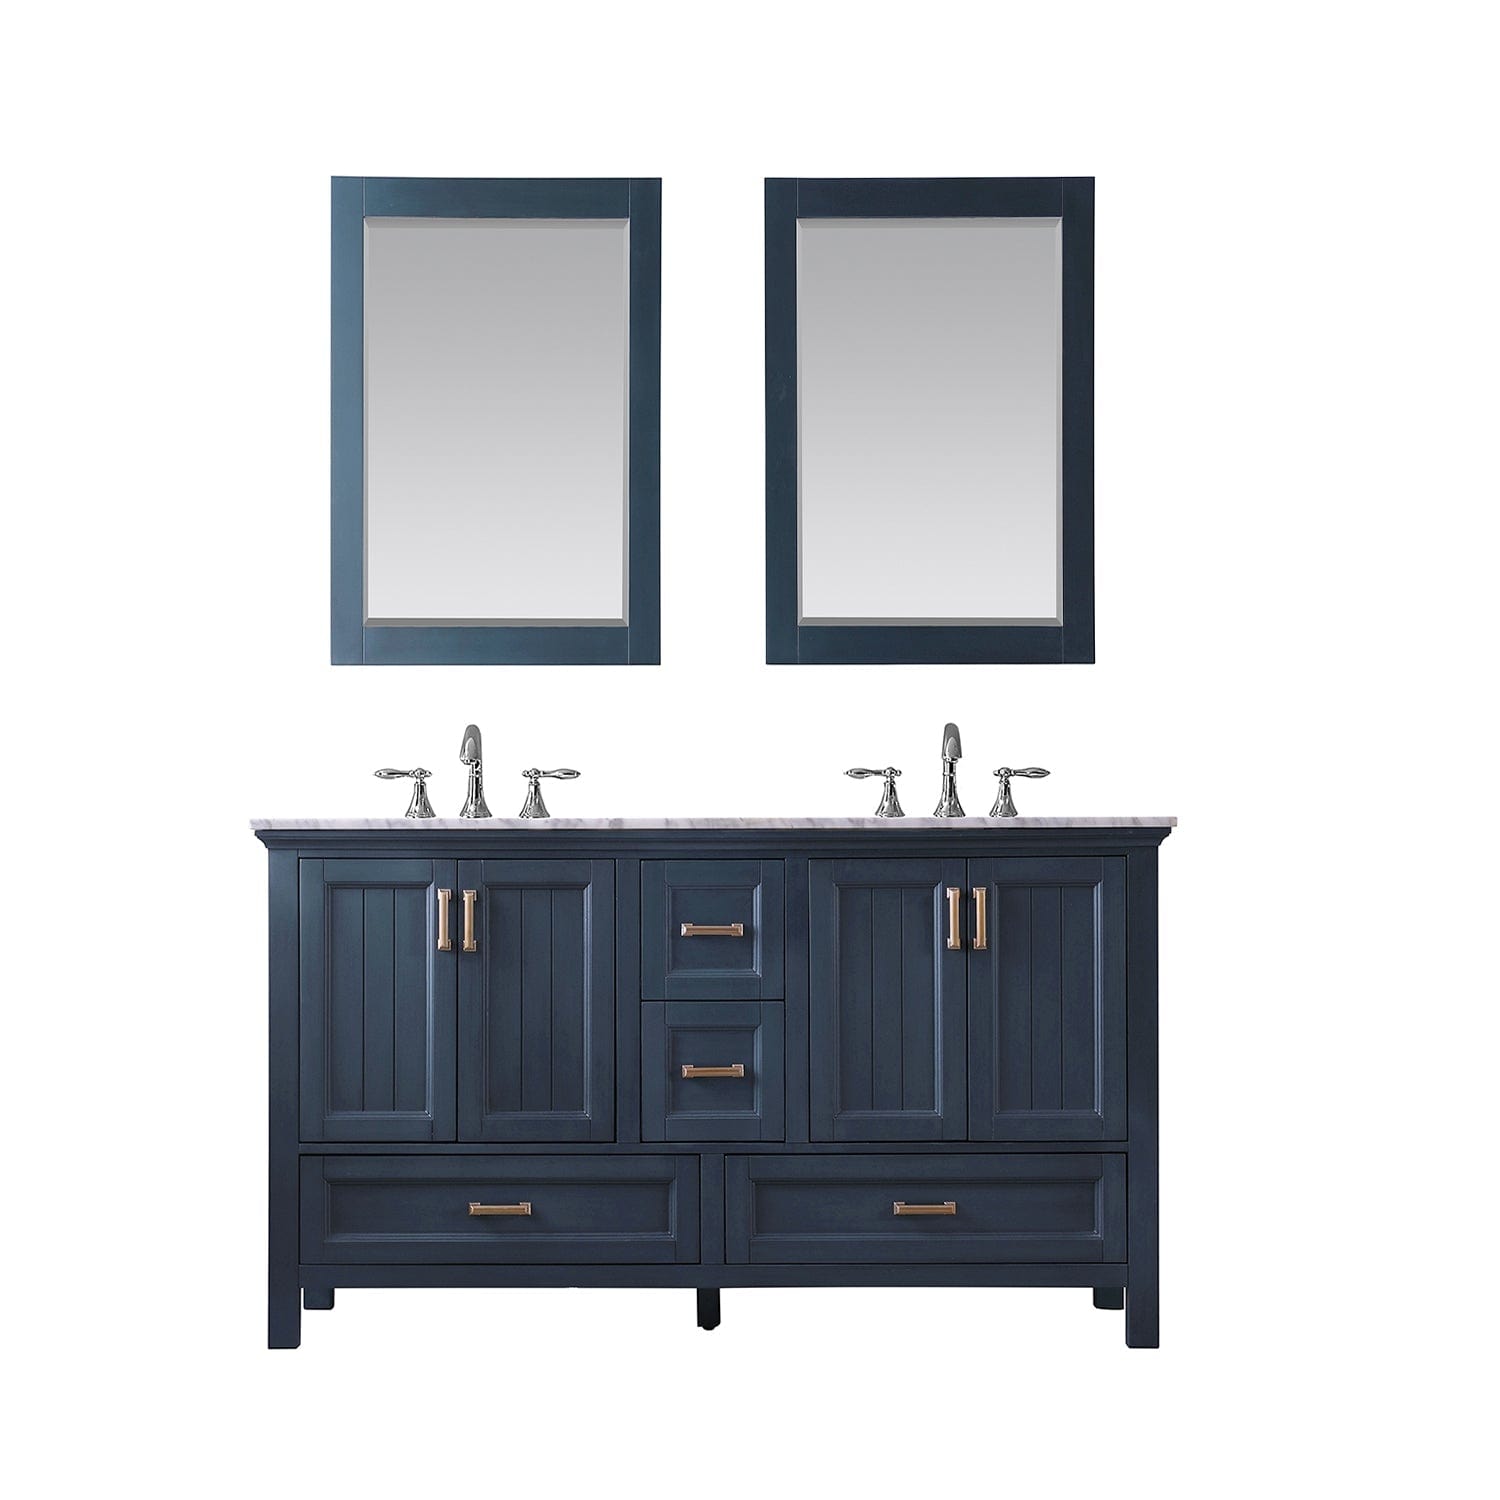 Altair Isla 60" Double Bathroom Vanity Set in Classic Blue and Carrara White Marble Countertop with Mirror 538060-CB-CA - Molaix631112970914Vanity538060-CB-CA